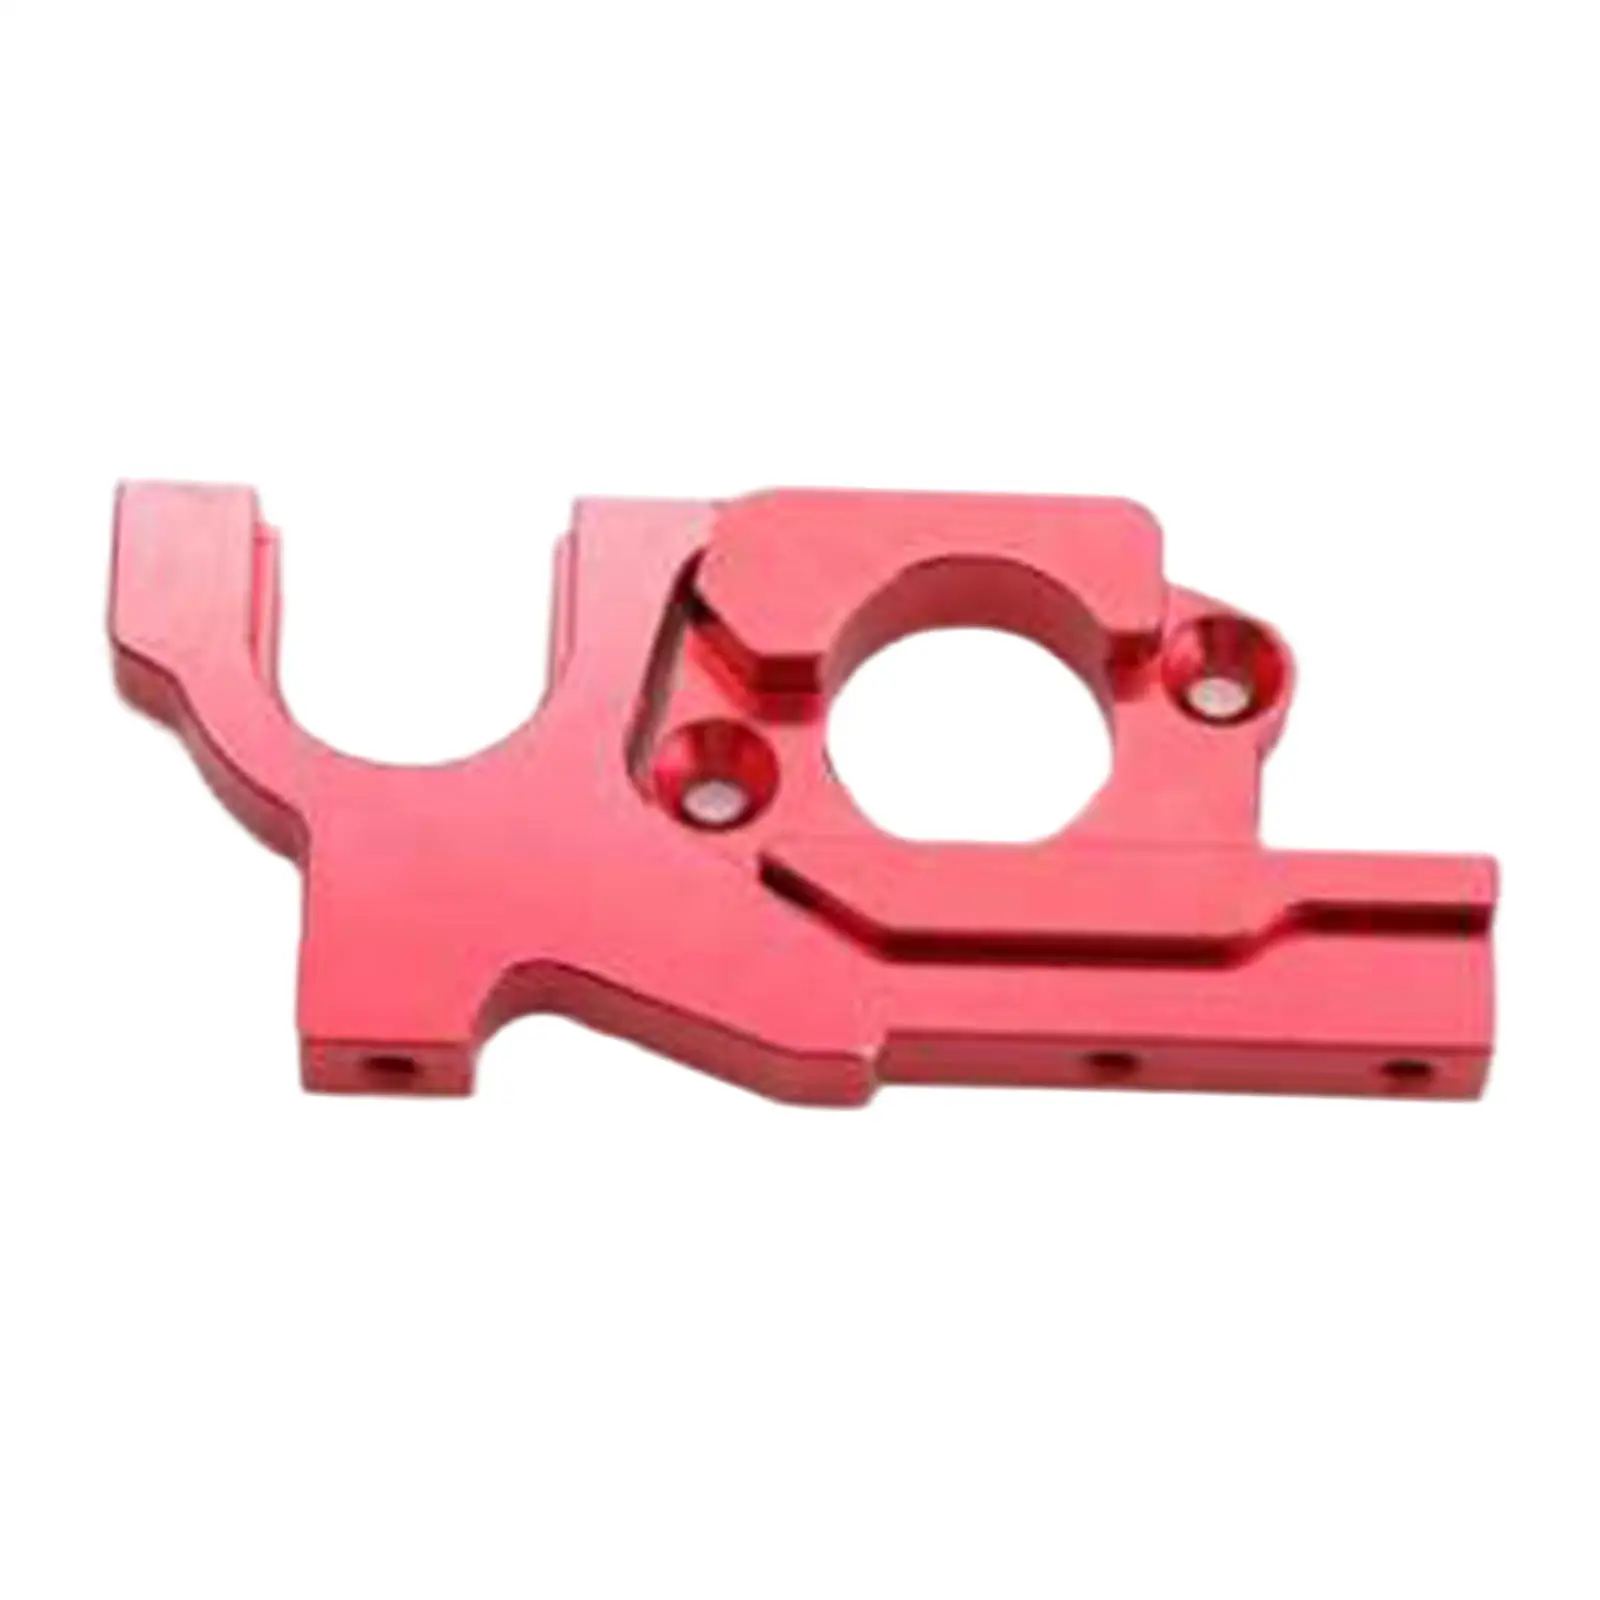 Upgrade Motor Mount Holder for WLtoys 104001 High Speed Buggy Car Model Vehicle Replacement Accessories